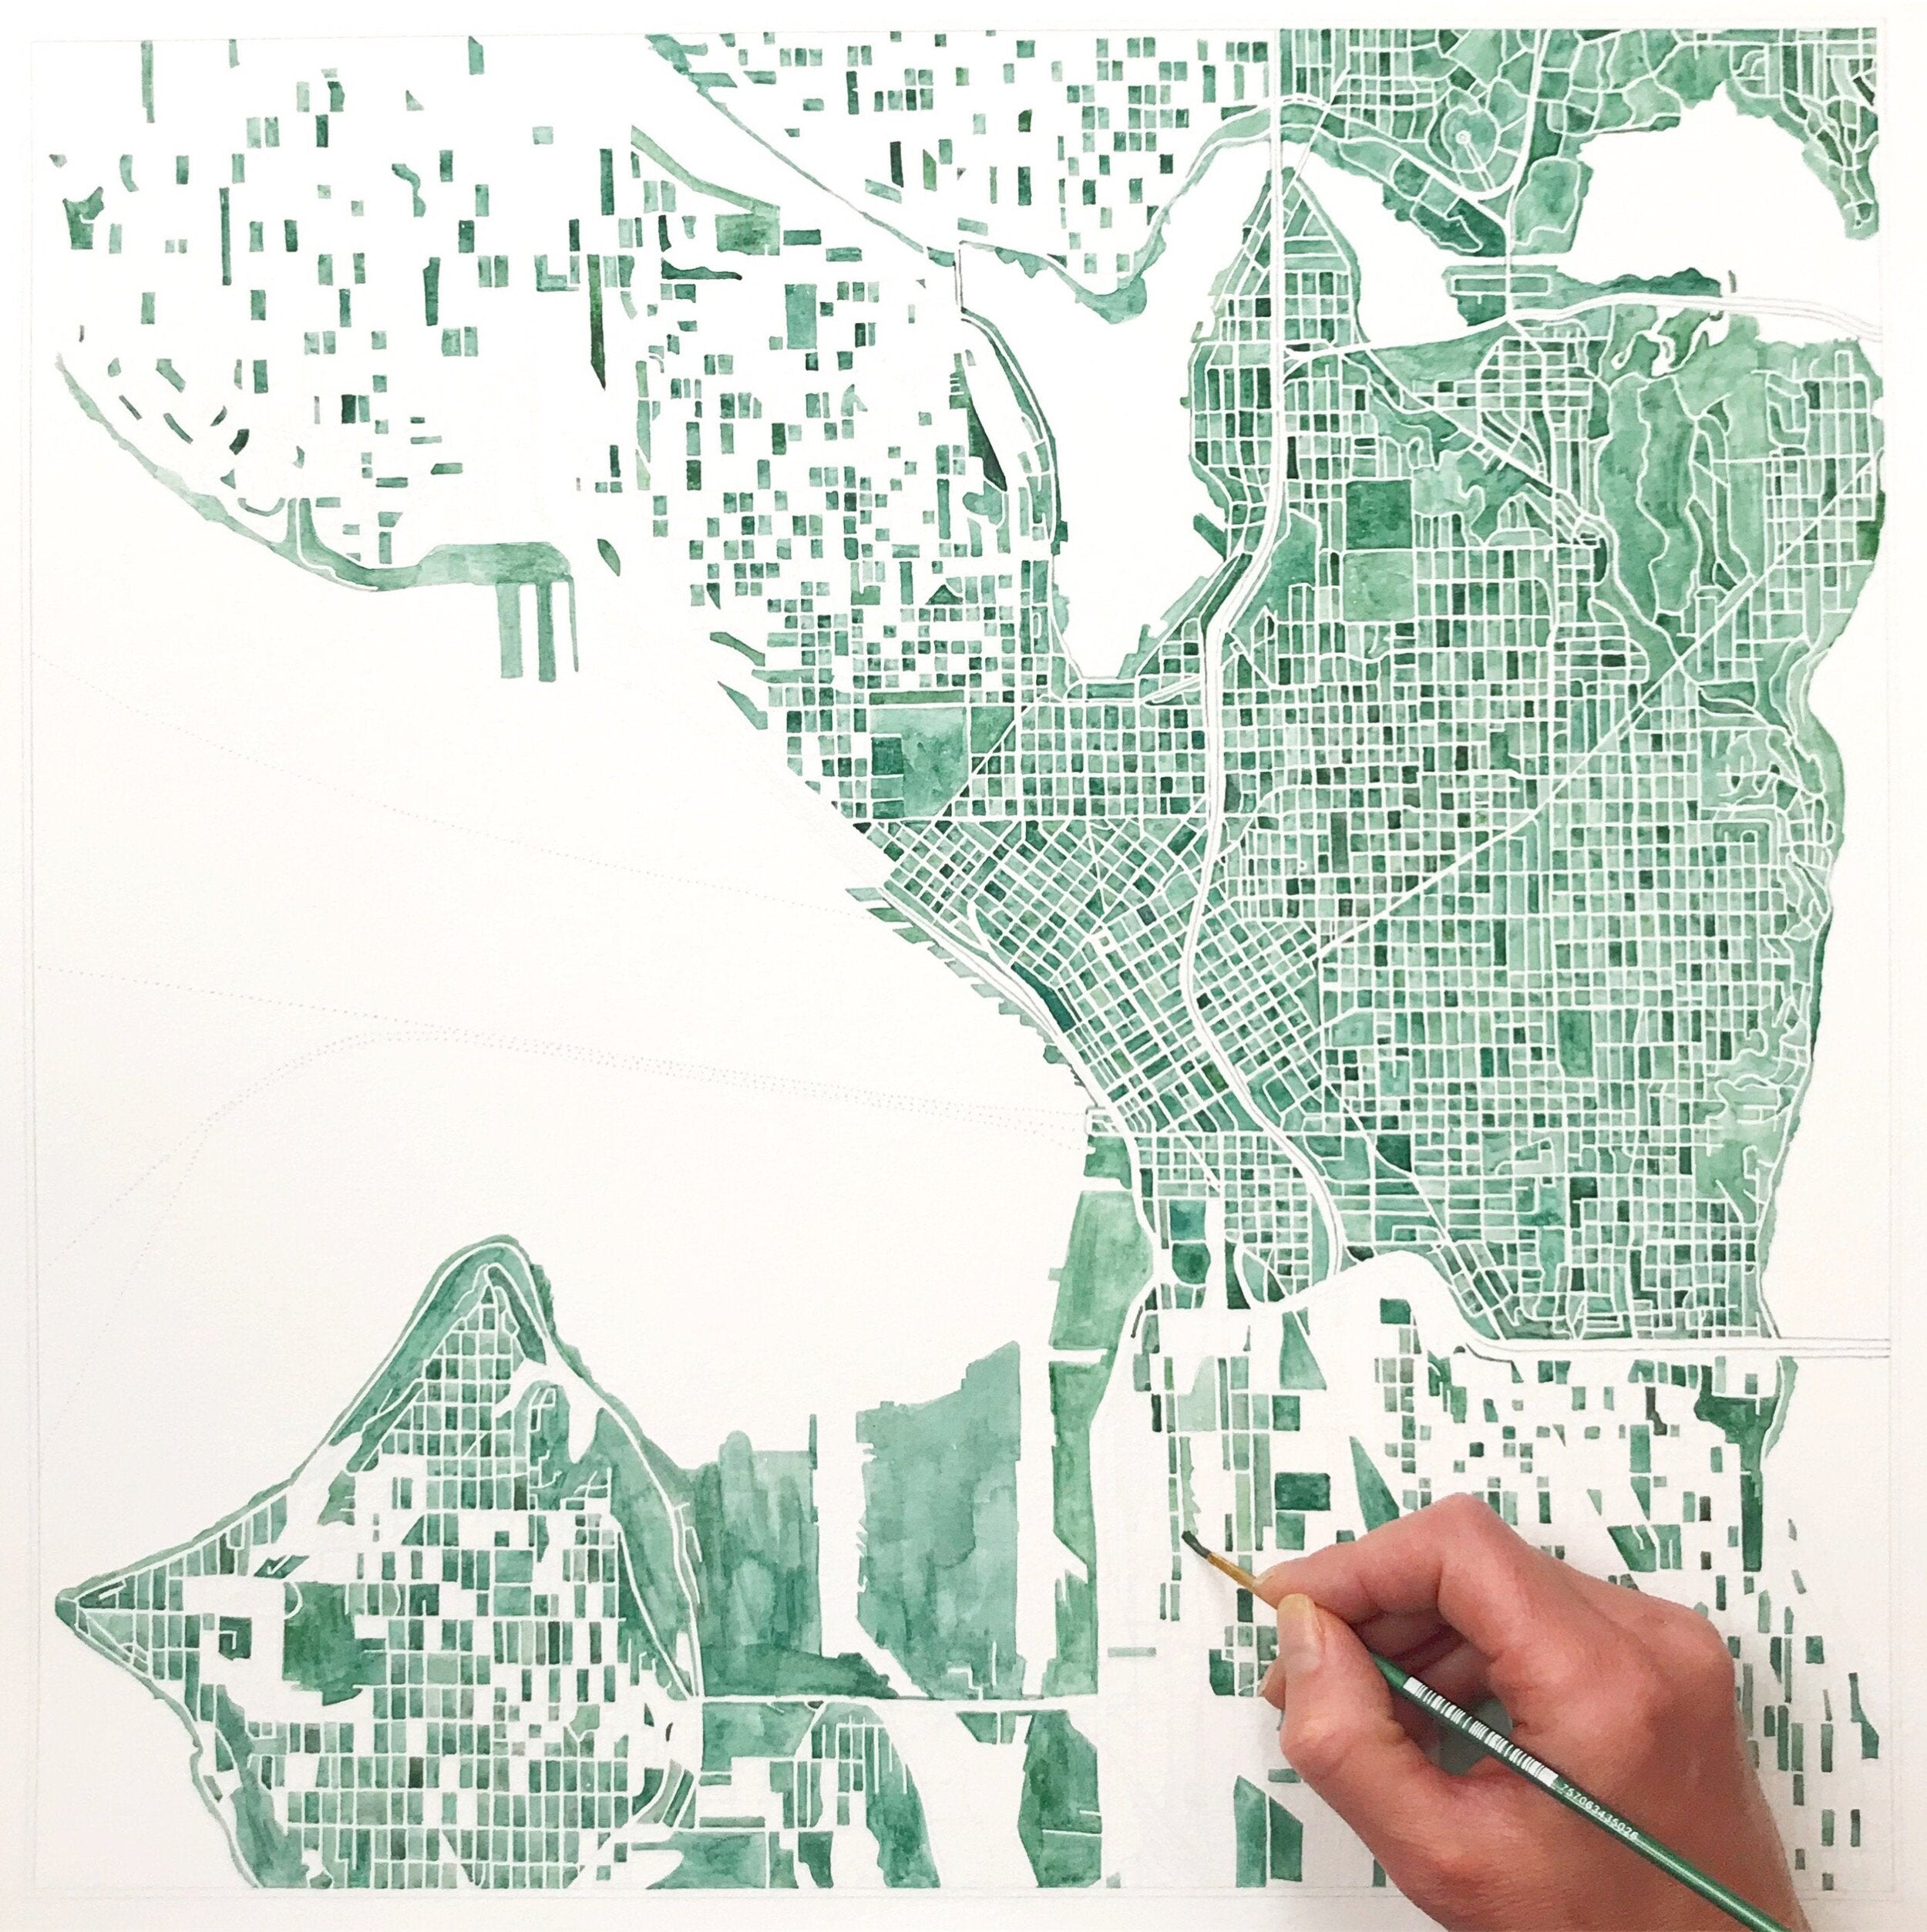 Downtown SEATTLE Watercolor City Blocks Map: ORIGINAL PAINTING (Commission)